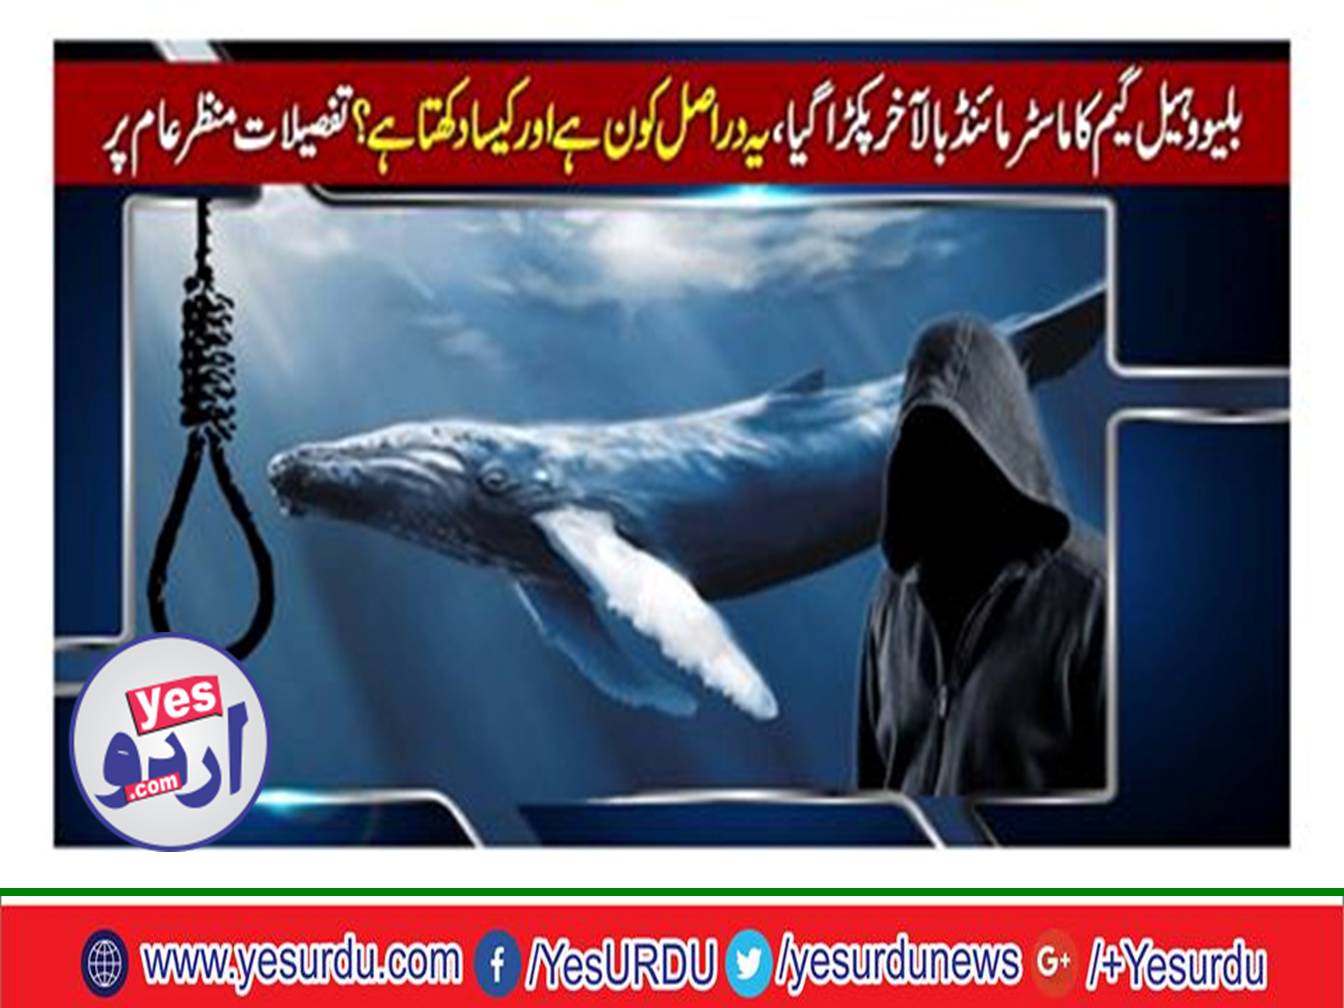 Blue Whale ‘game’ mastermind at last arrested